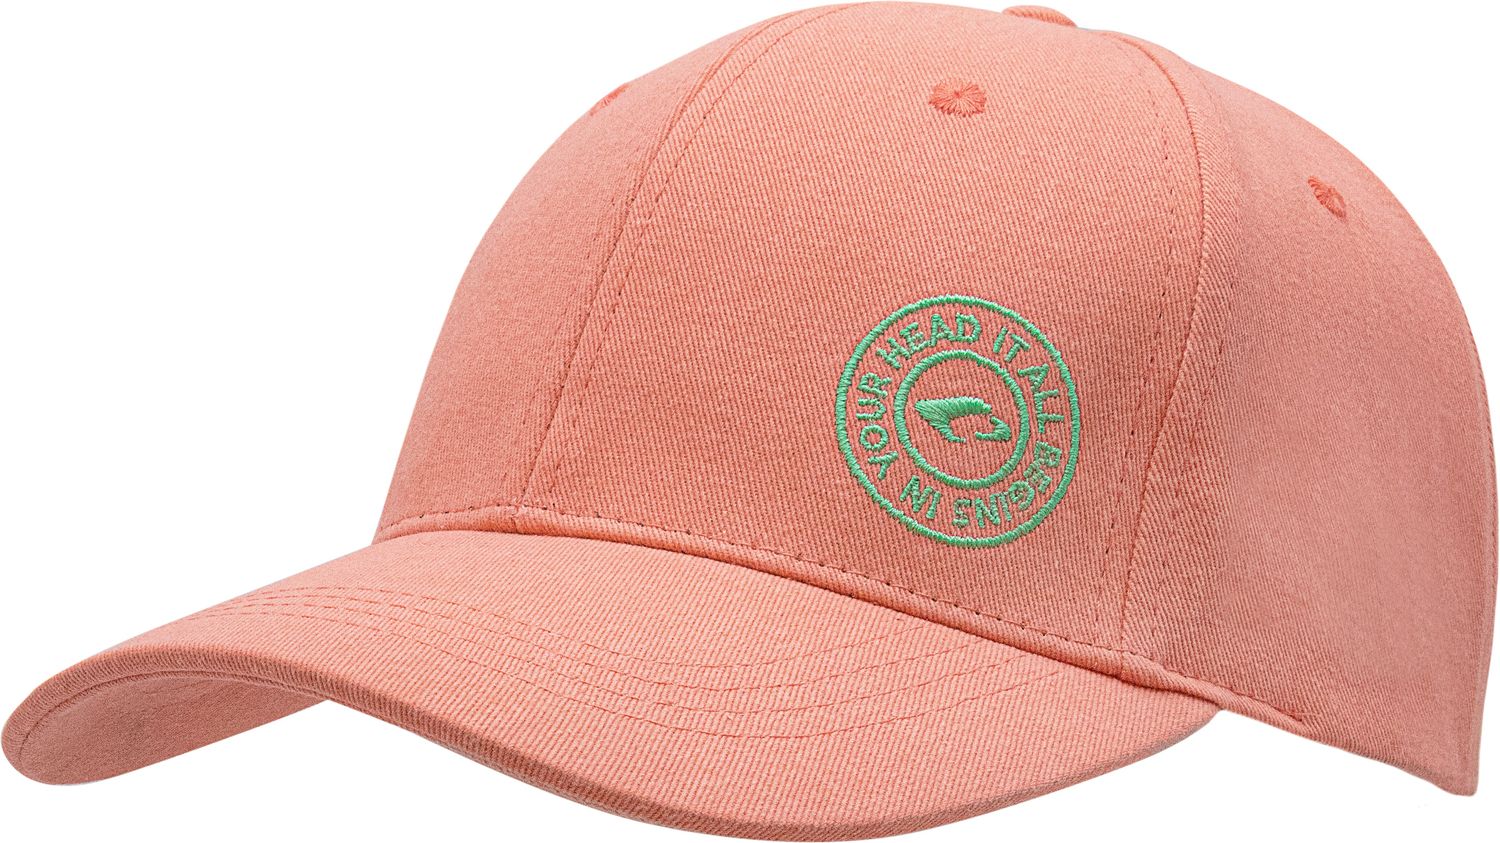 Chillouts Arklow Pastell Baseball Cap aus Baumwolle von Chillouts